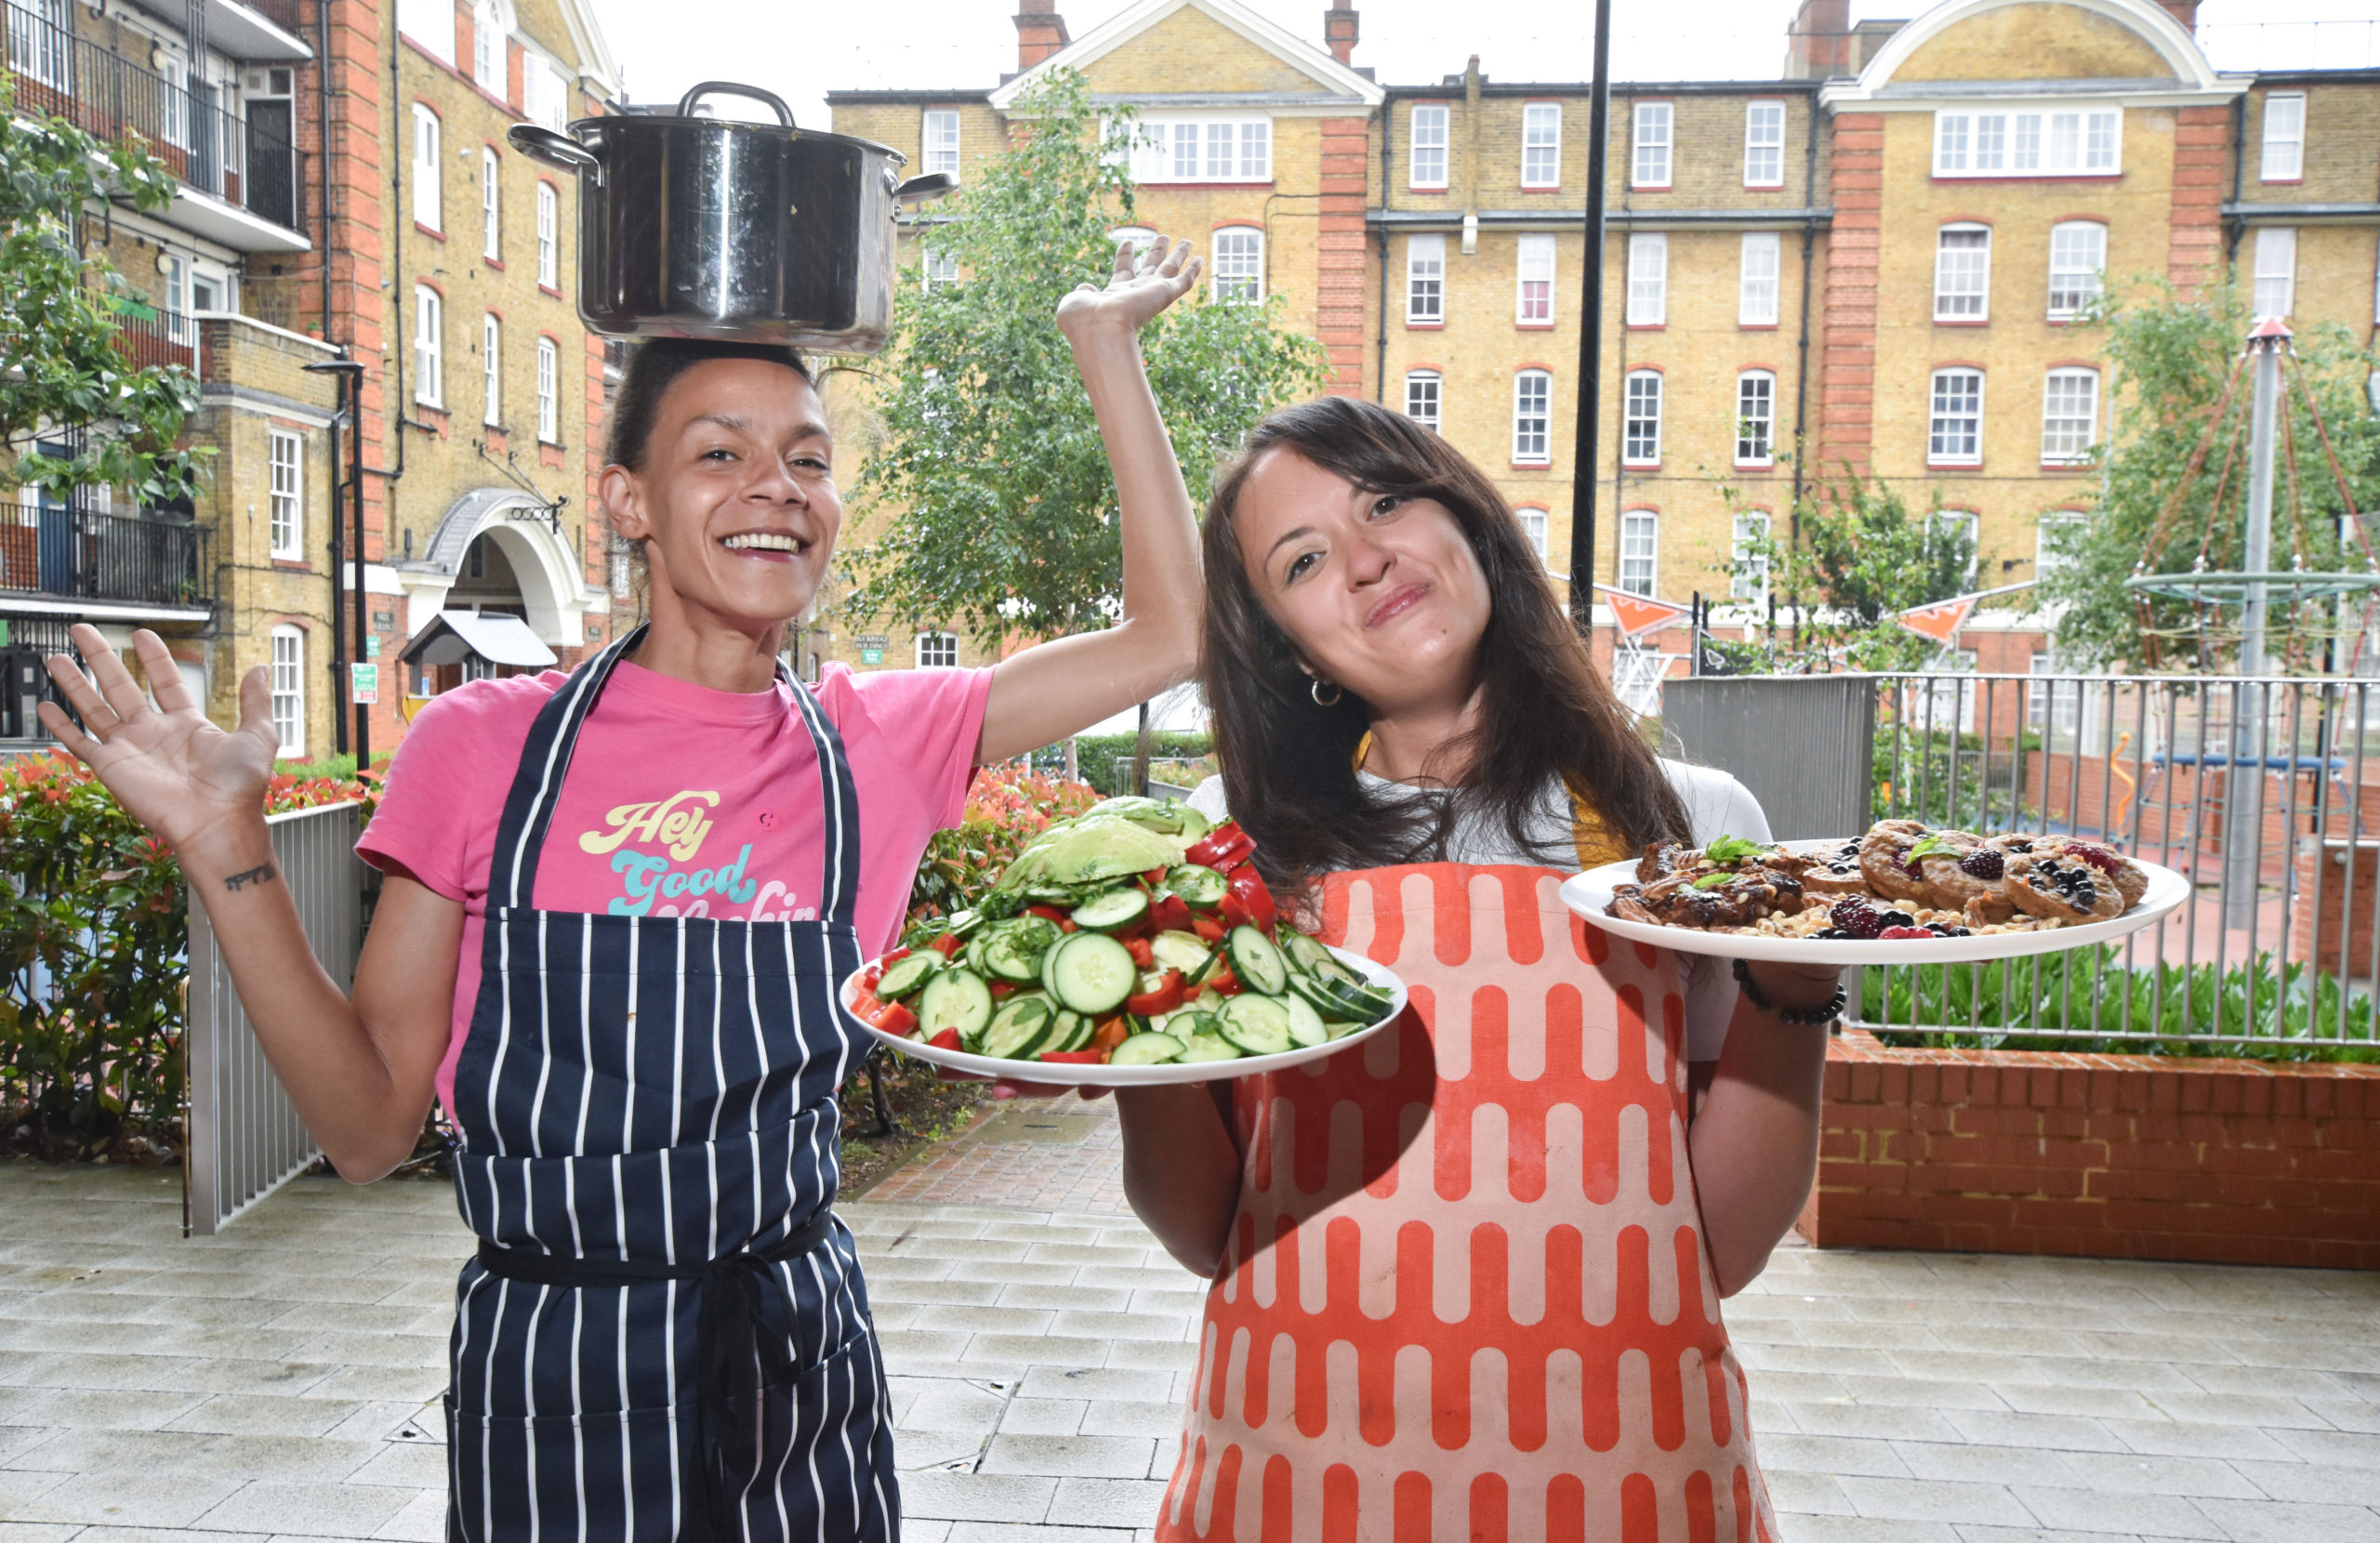 Charise and a female workshop participant are standing outside at the Bourne Estate. Both are wearing aprons. Charise is holding two large plates of fresh salad and sweet potato brownies. The participant is smiling at the camera while balancing a saucepan on her head.